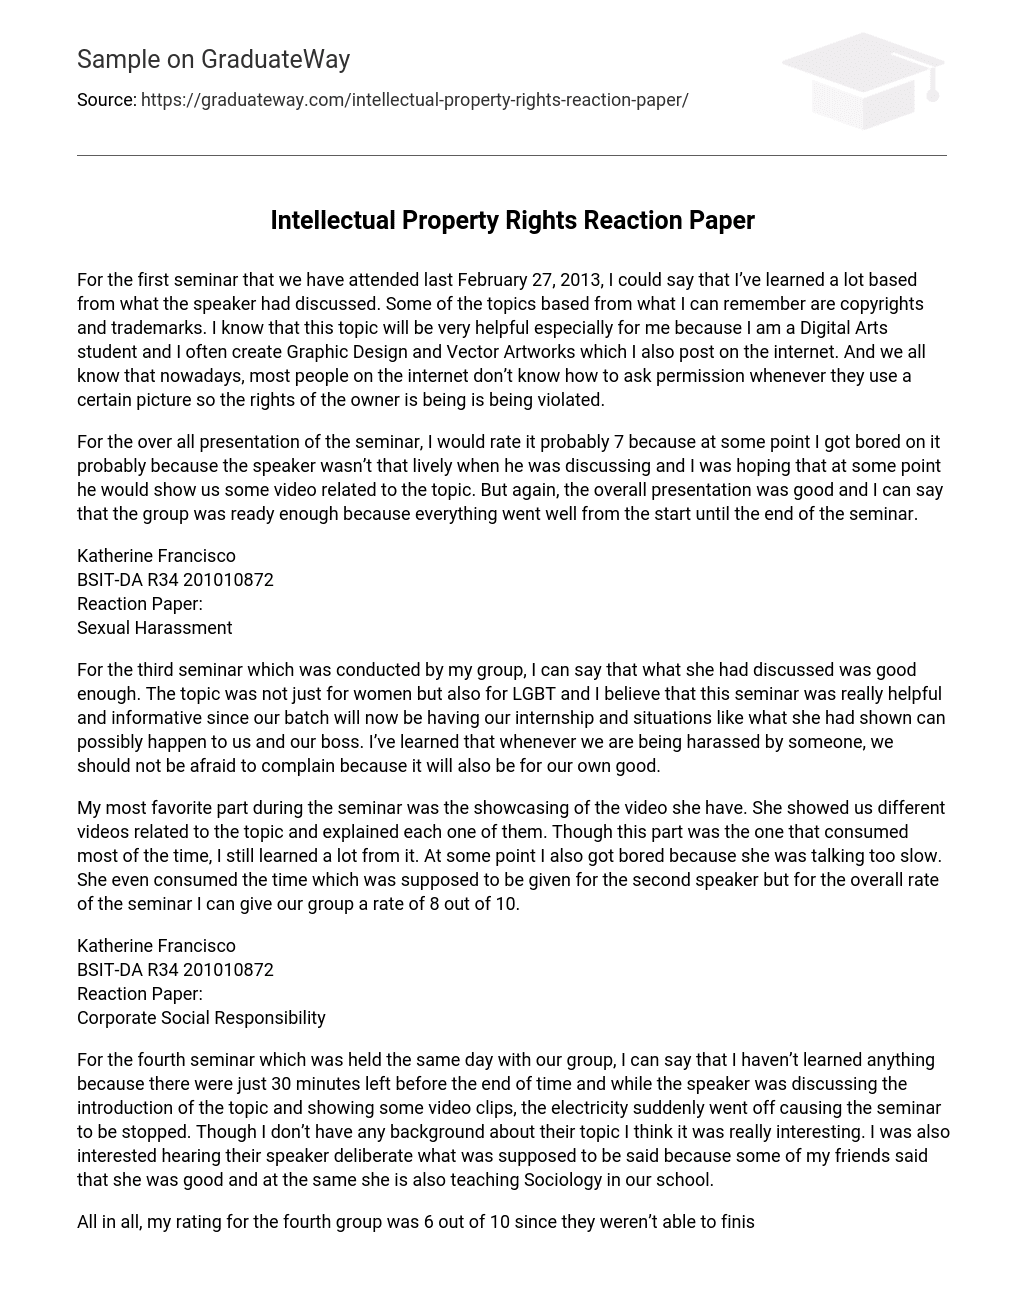 Intellectual Property Rights Reaction Paper